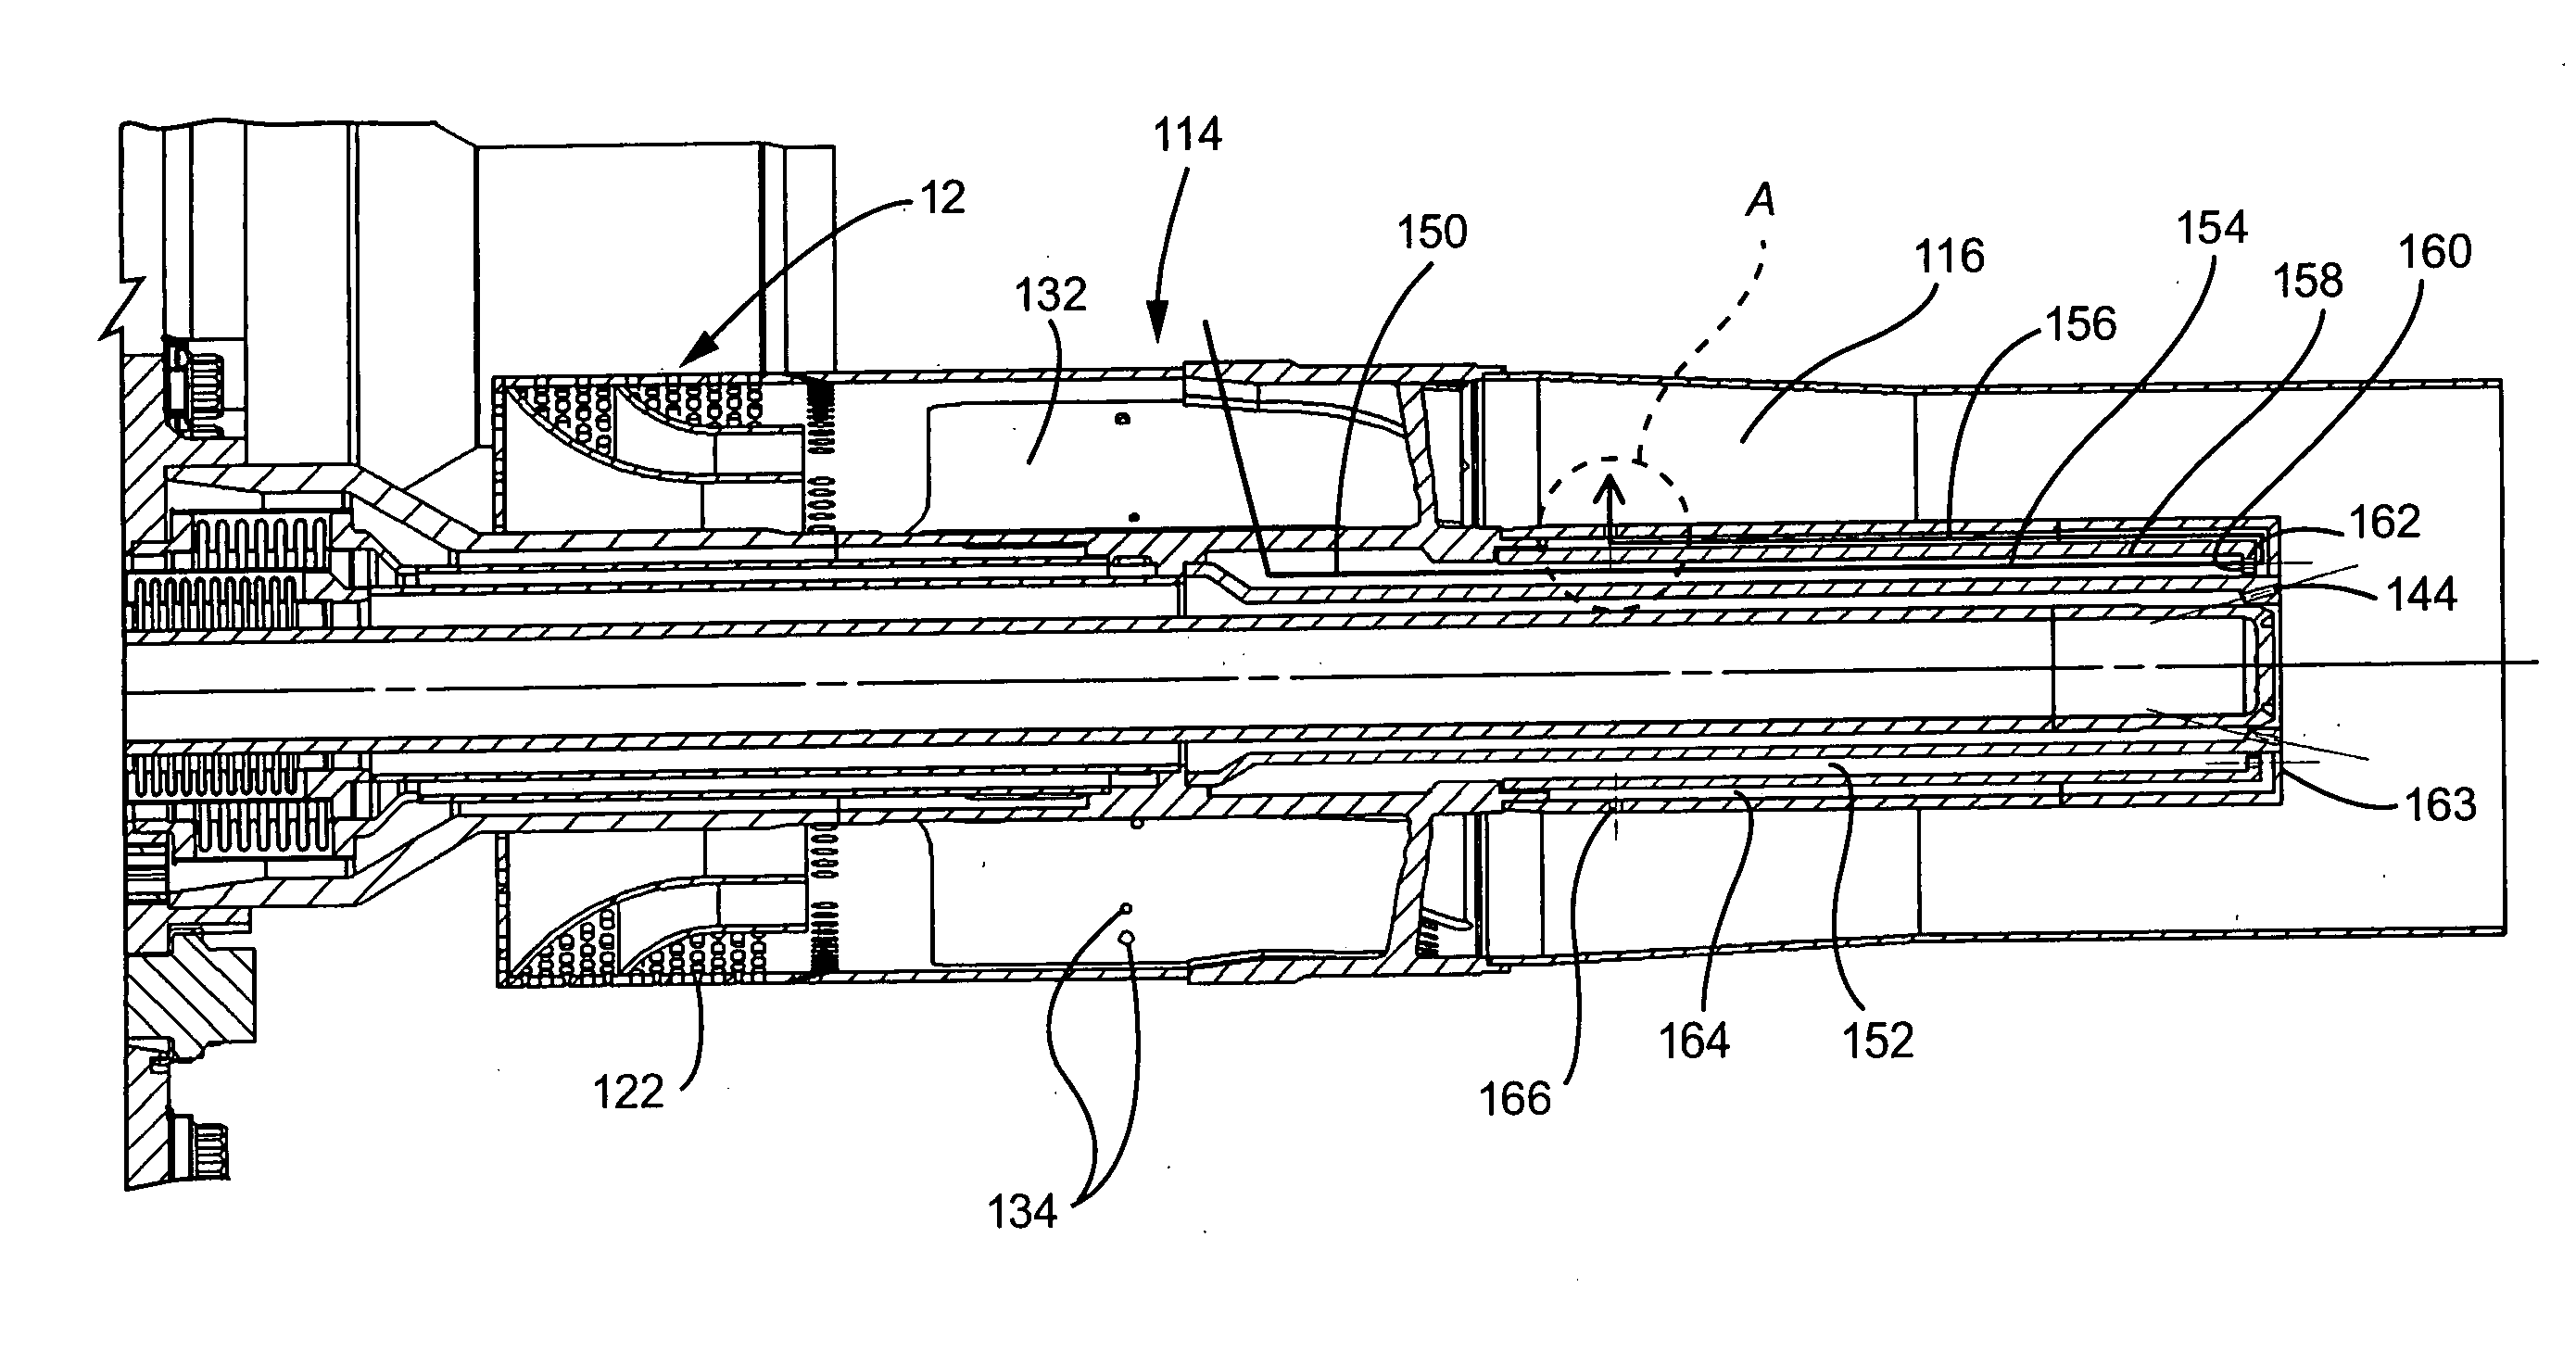 Premixing burner with impingement cooled centerbody and method of cooling centerbody